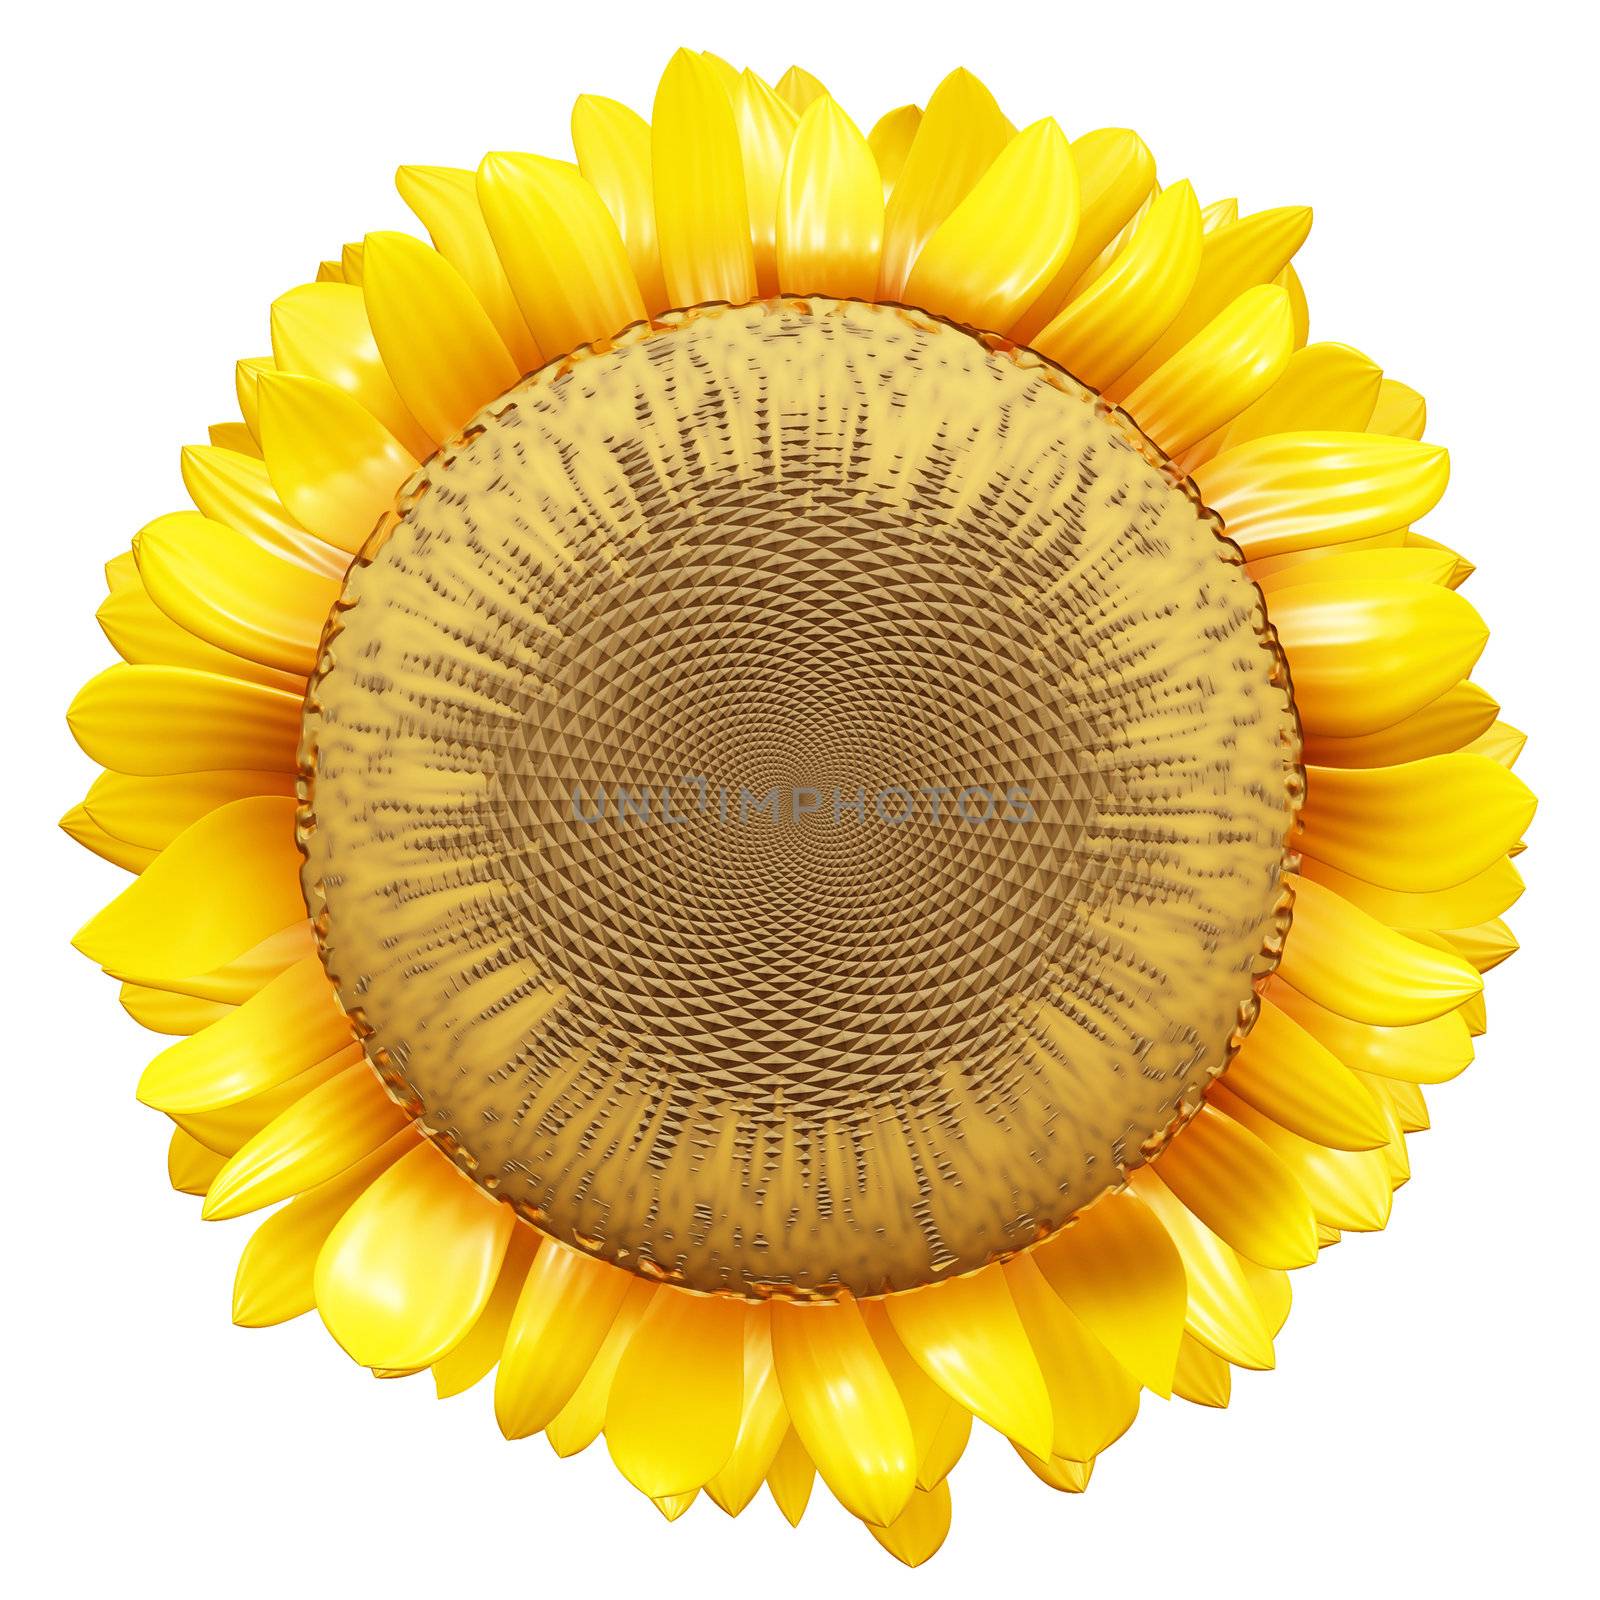 Sunflower Clip Art Isolated on a White Background